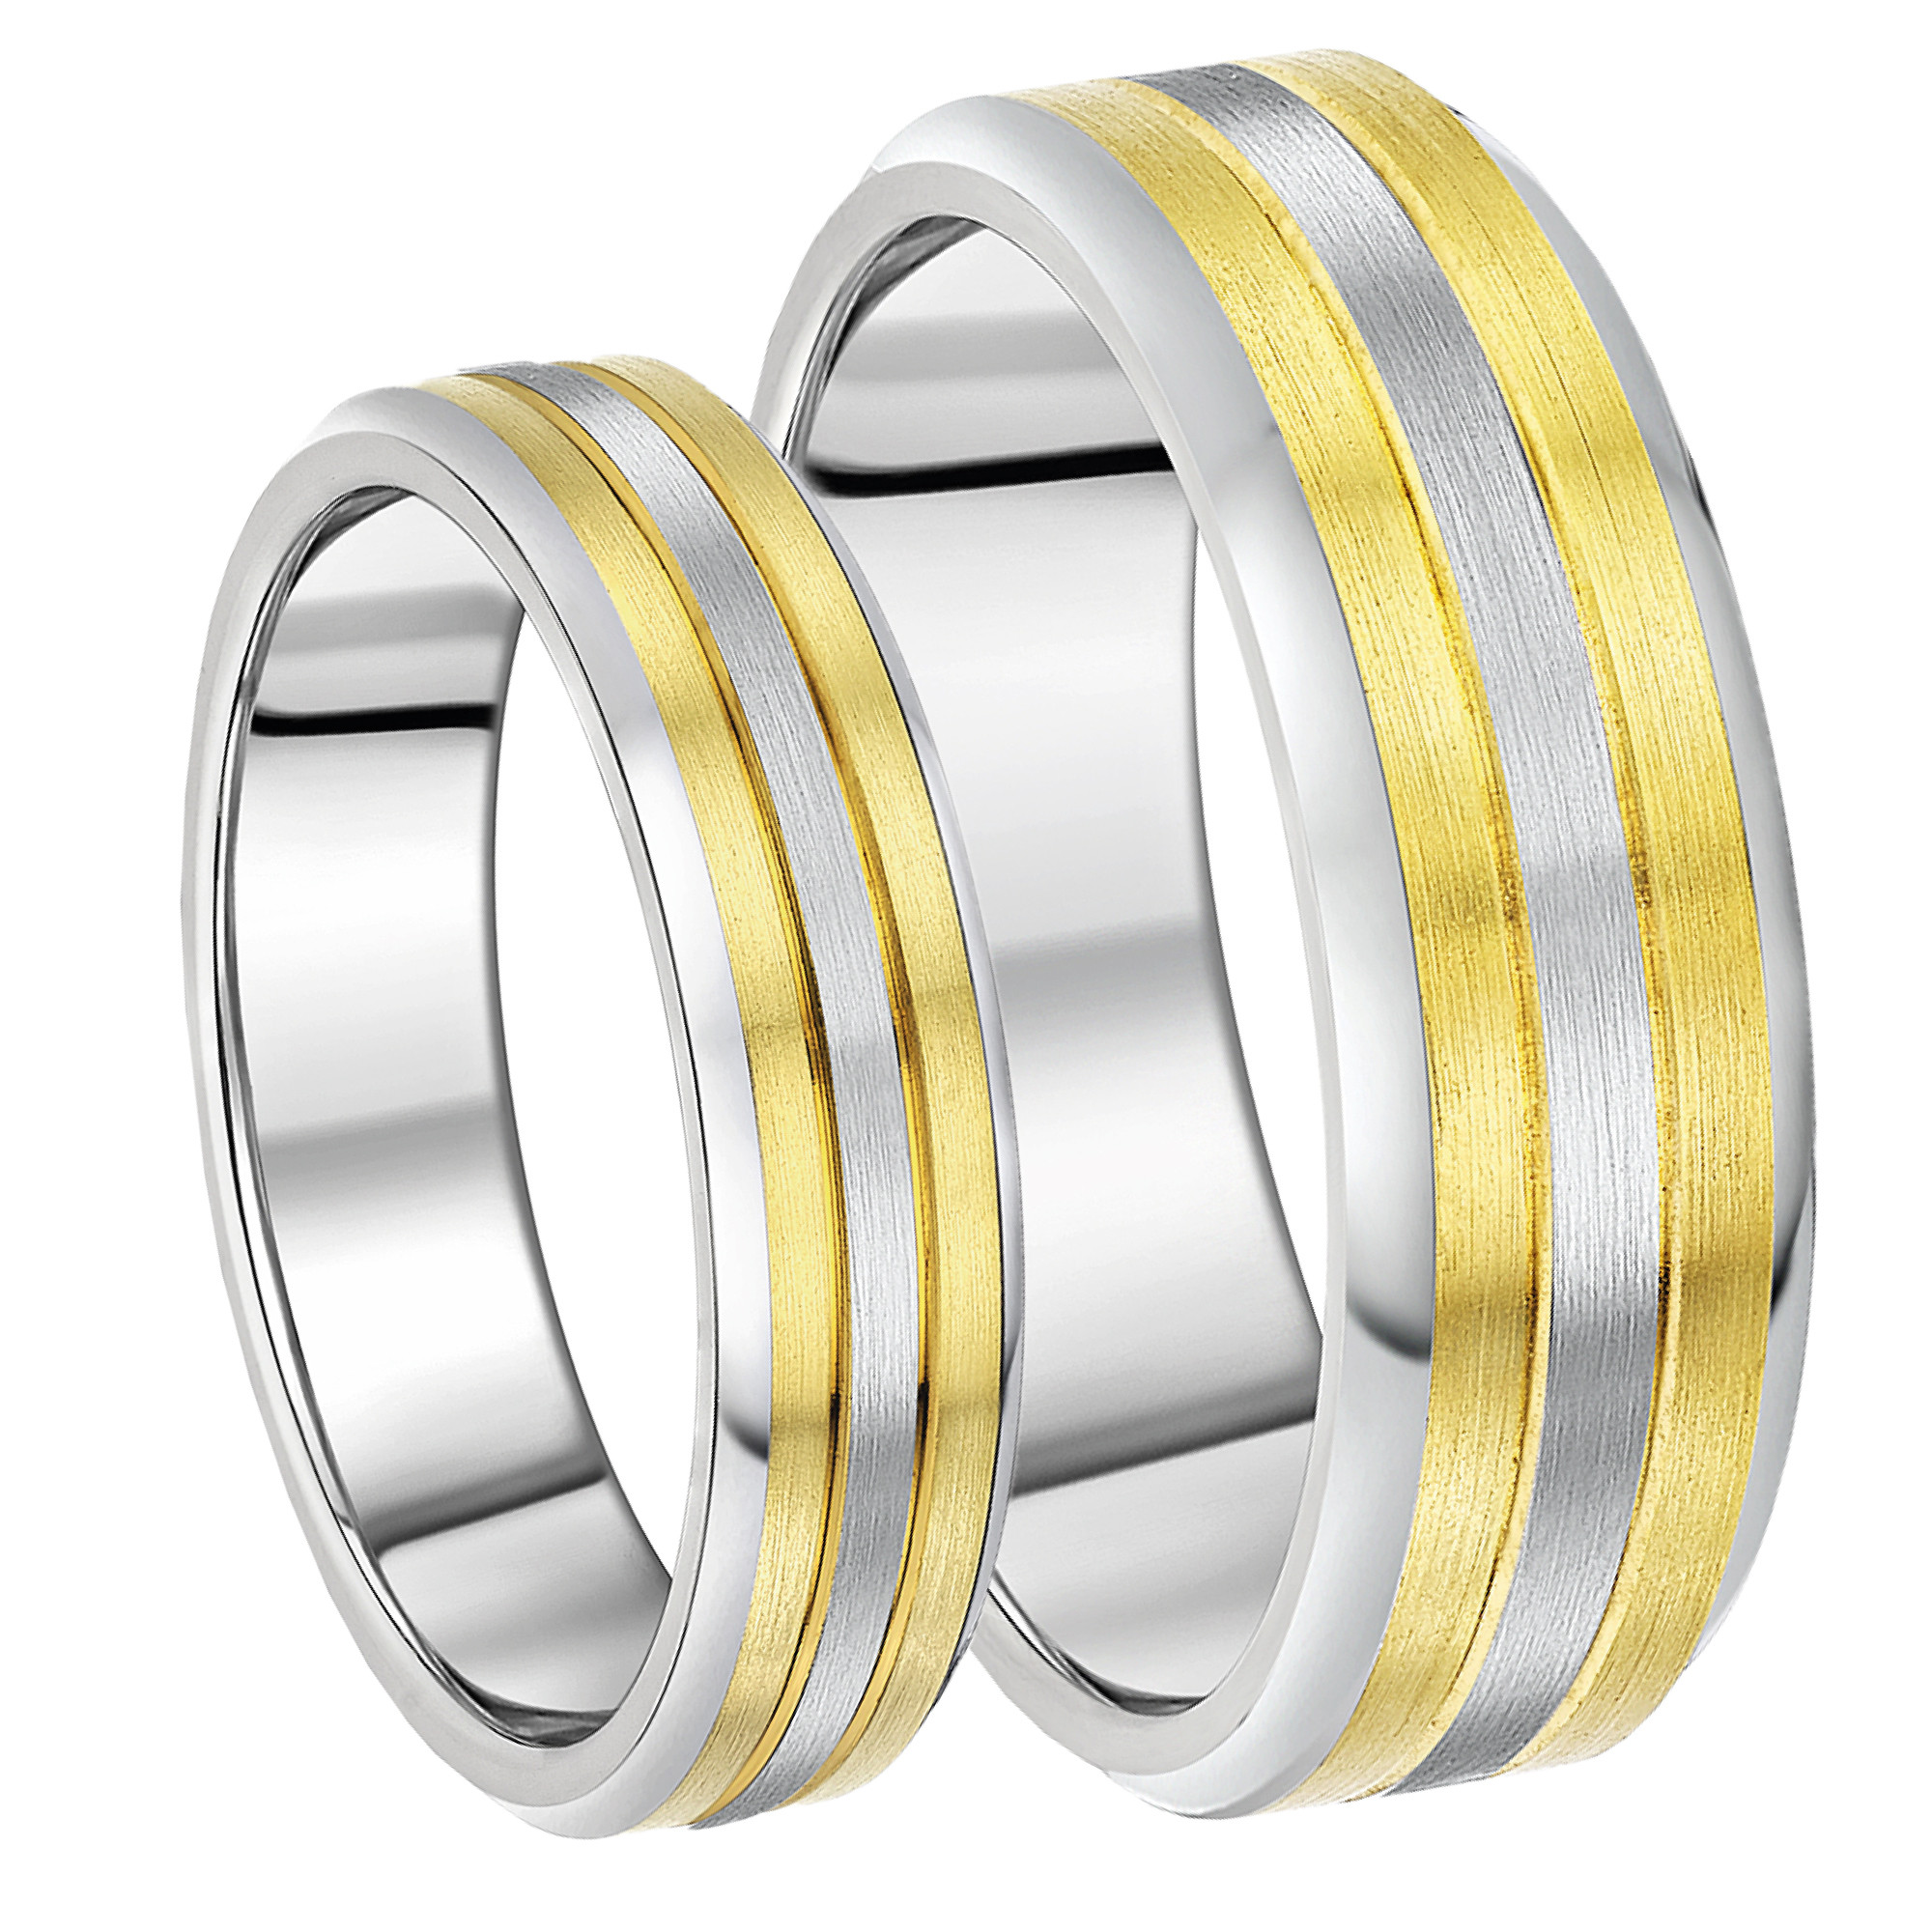 Two Tone Wedding Ring Sets
 His & Hers 6&8mm Titanium Two Tone Wedding Rings